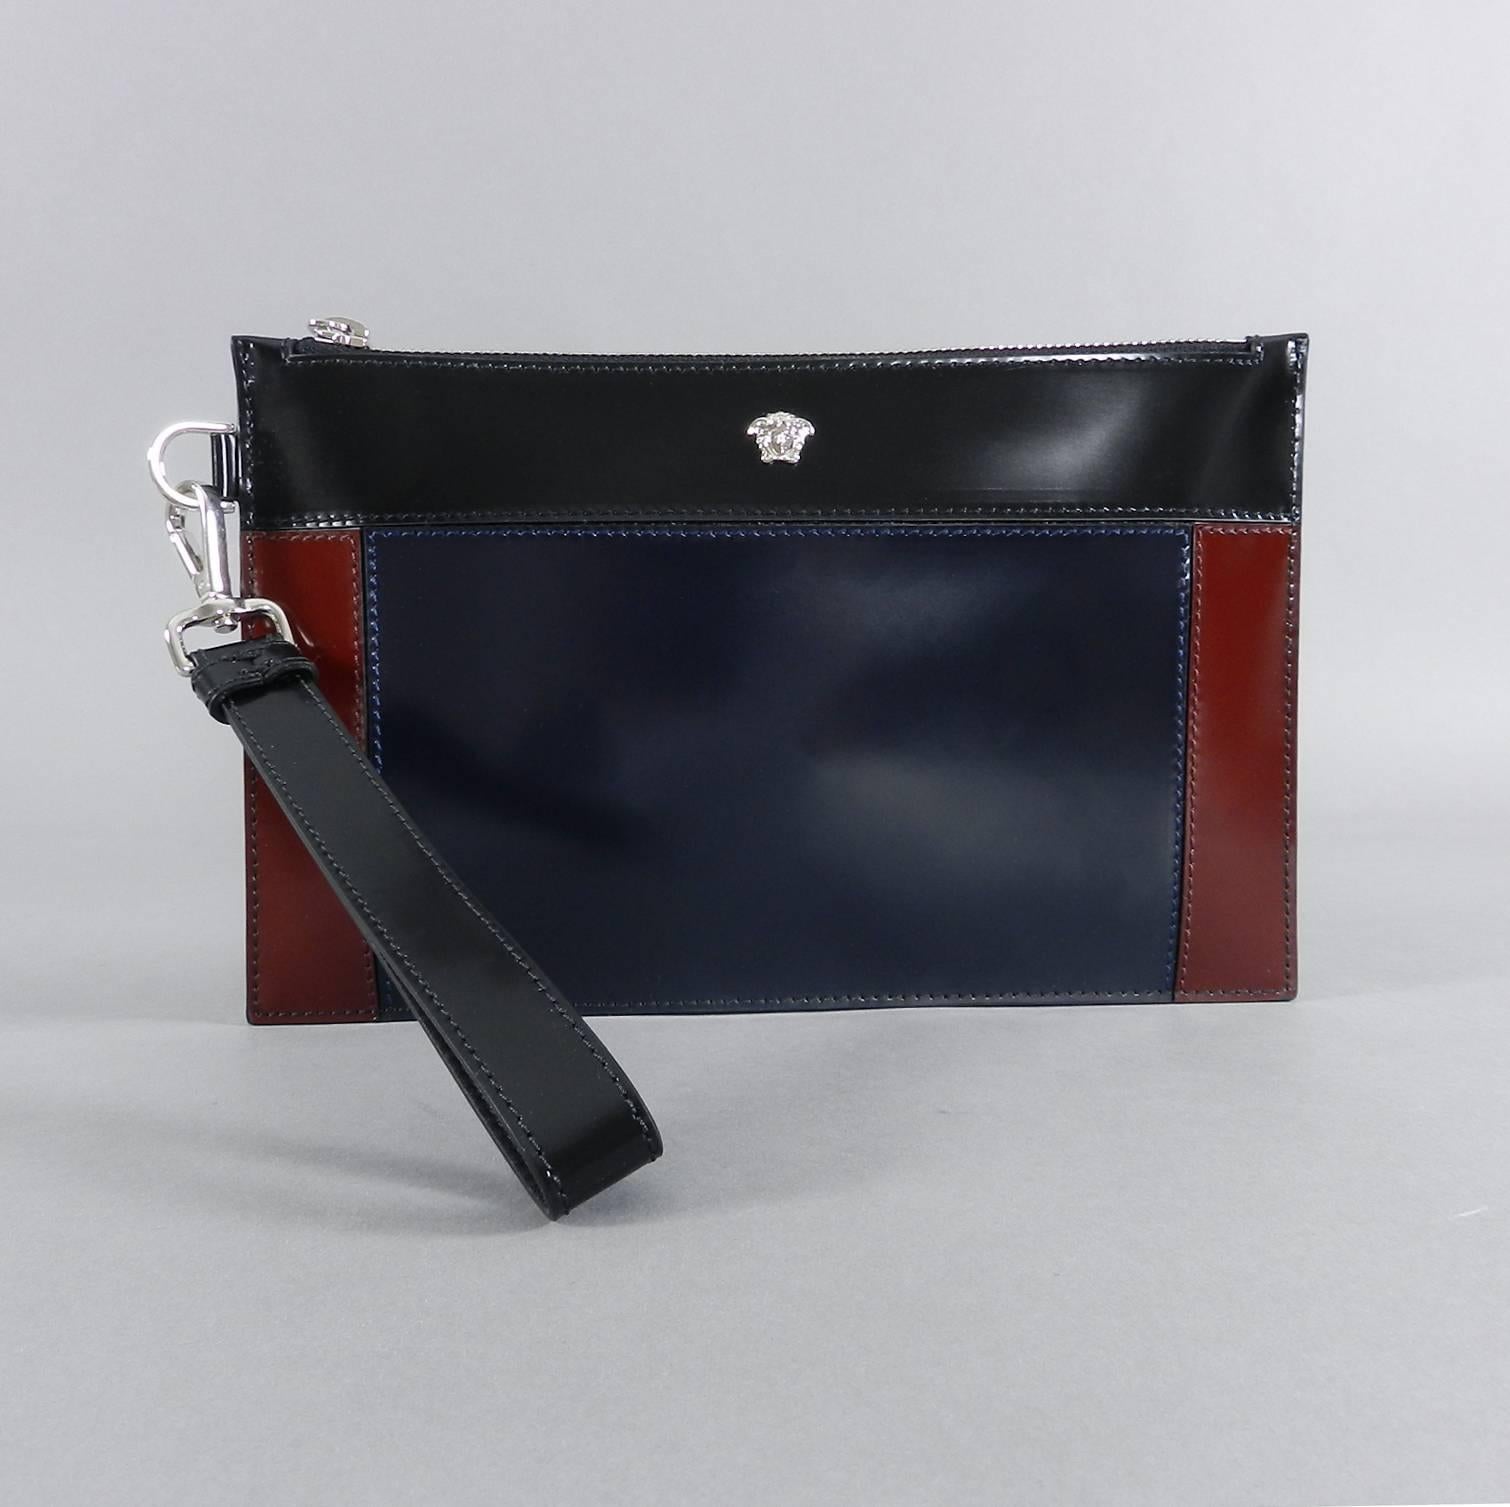 Versace Navy, Burgundy, Black Colorblock Leather Wristlet Clutch Bag.  Removable wrist strap, silvertone metal hardware, signature medusa head stud at front.  Includes duster.  Fabric lined, glossy high shine leather, color block design.  New